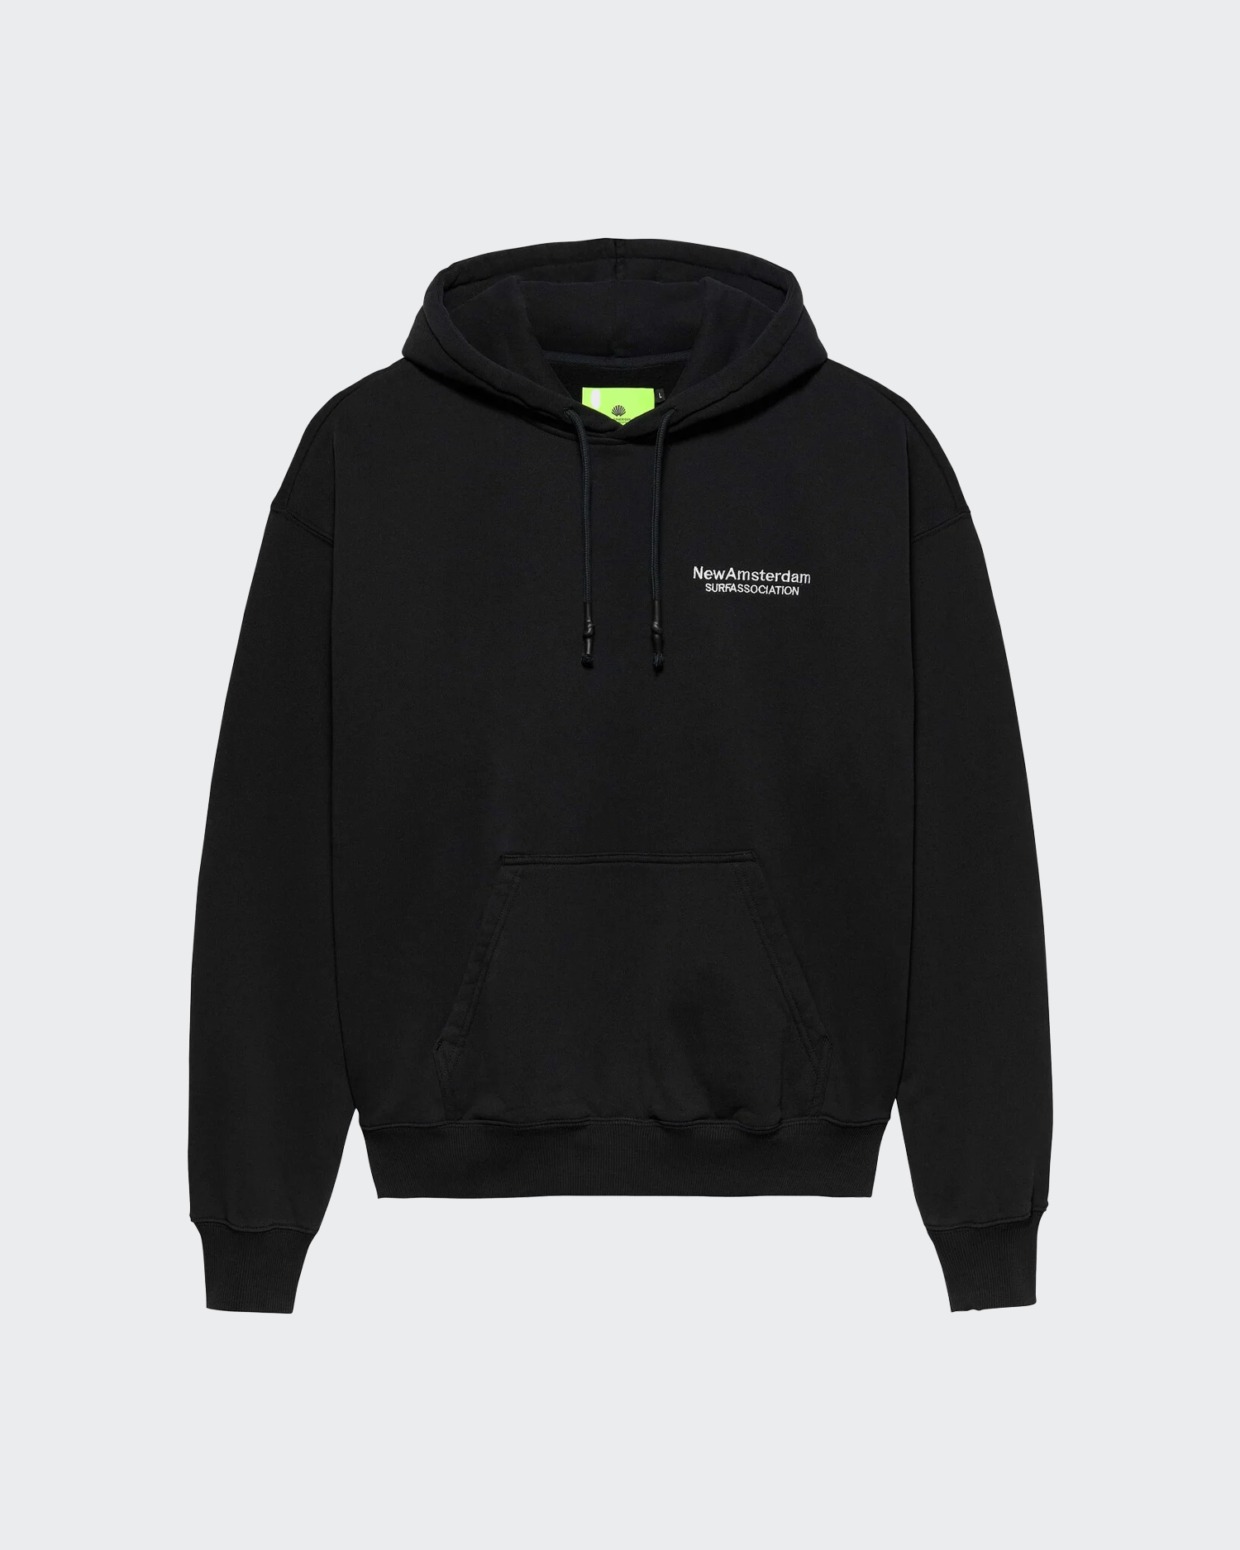 New Amsterdam Surf Association Weather Icon Hoodie